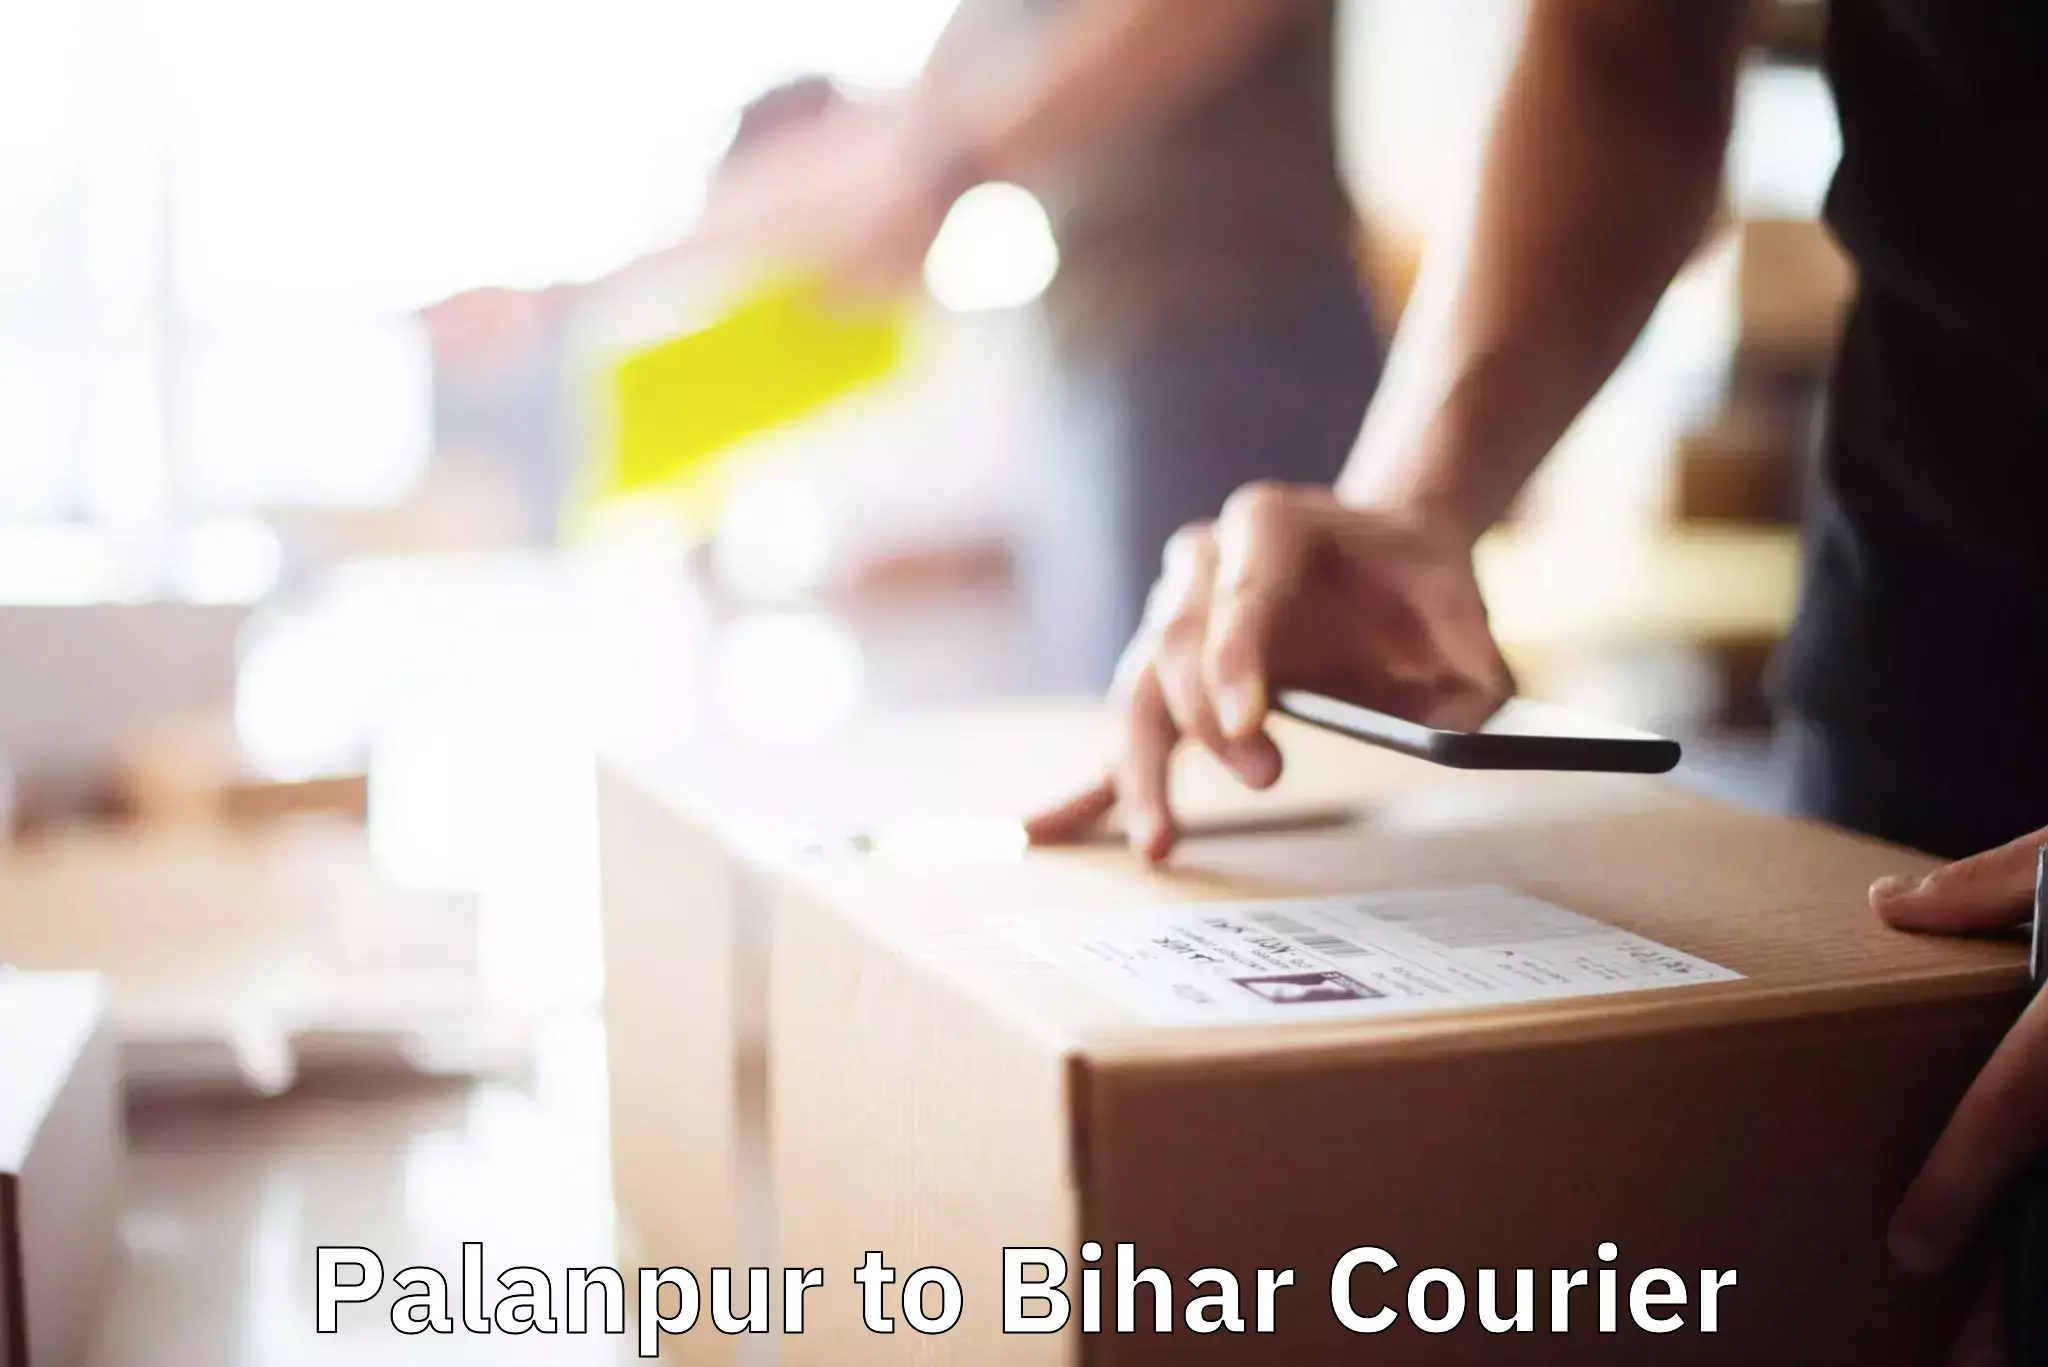 Furniture delivery service Palanpur to Kursela